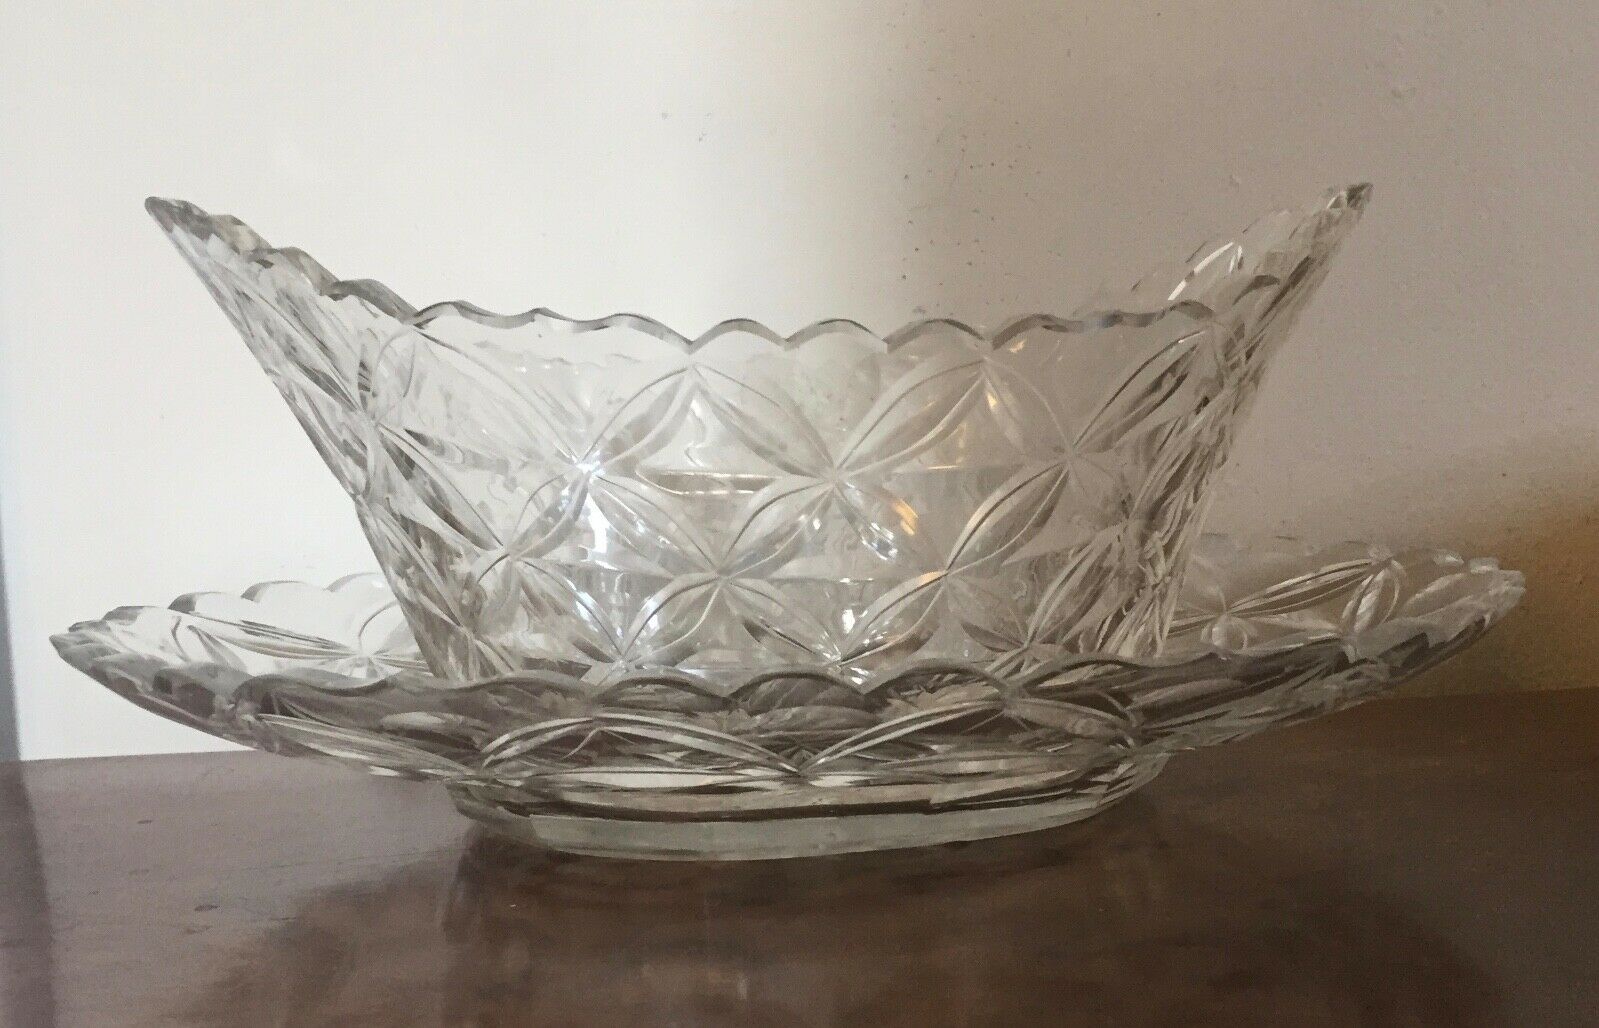 Antique 18th / 19th C. Anglo Irish Cut Crystal Glass Bowl Compote & Platter Tray